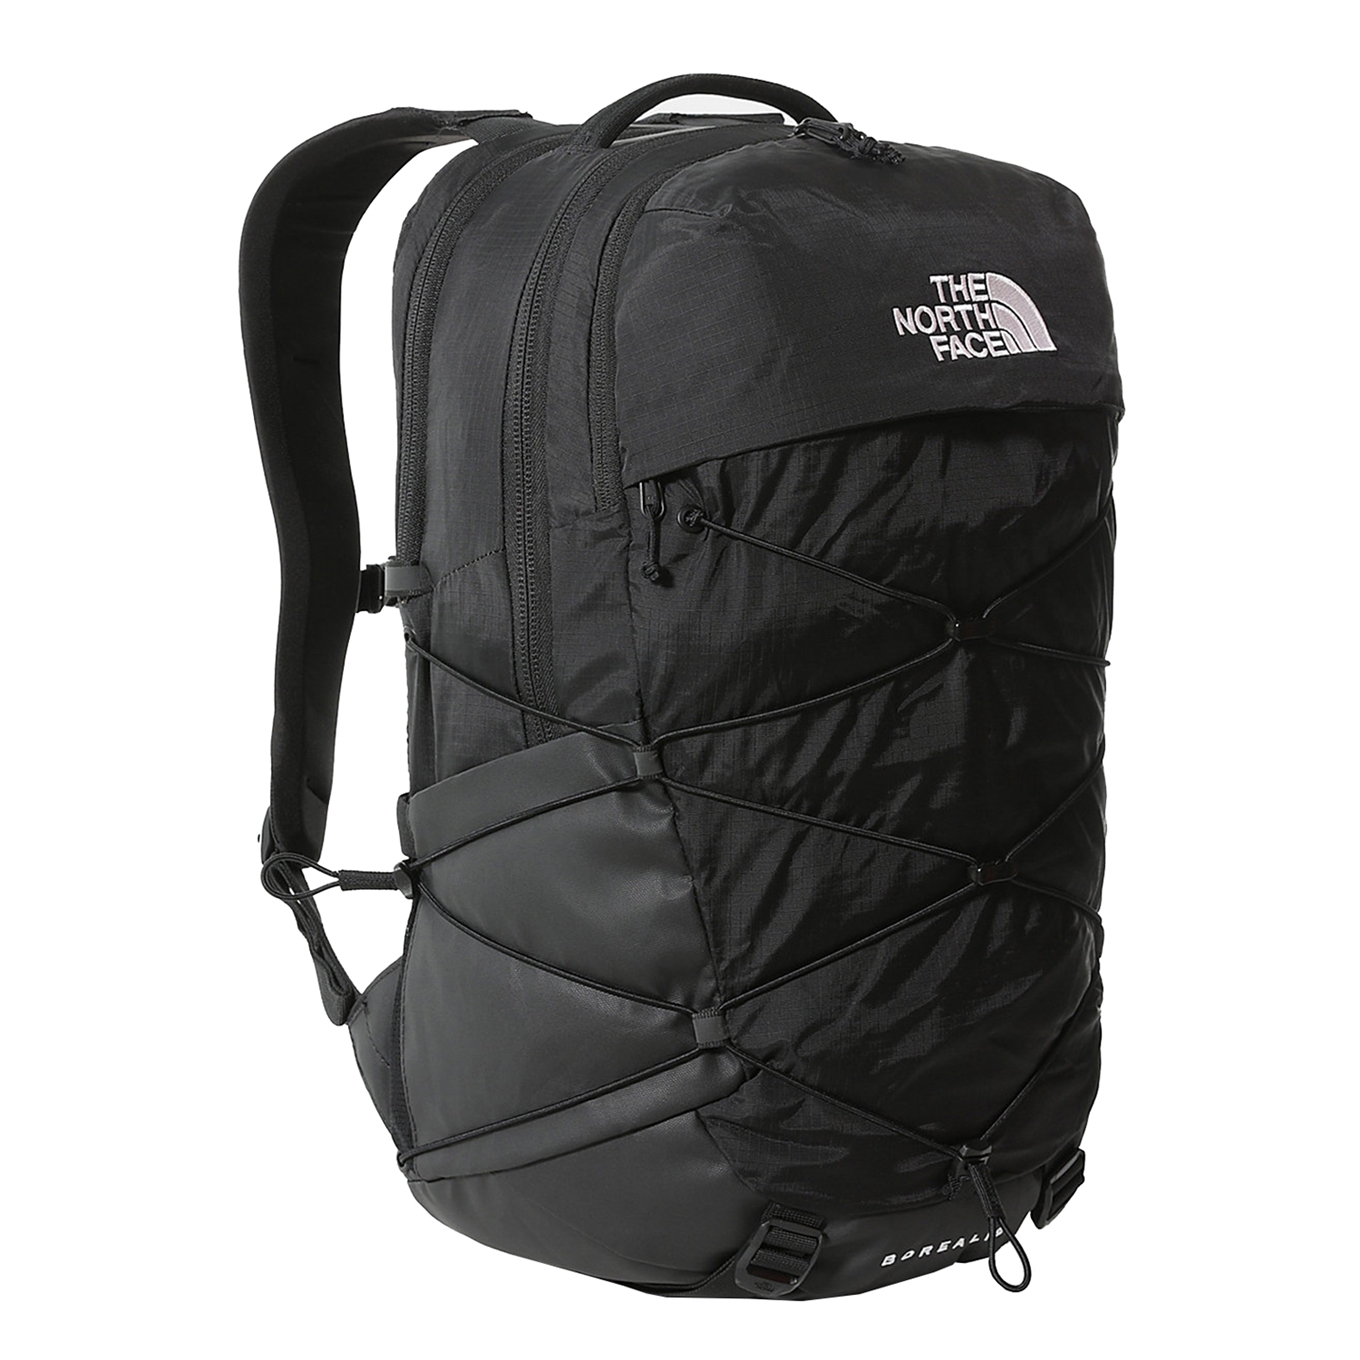 lobby welzijn trimmen The North Face Borealis Backpack black | Travelbags.nl